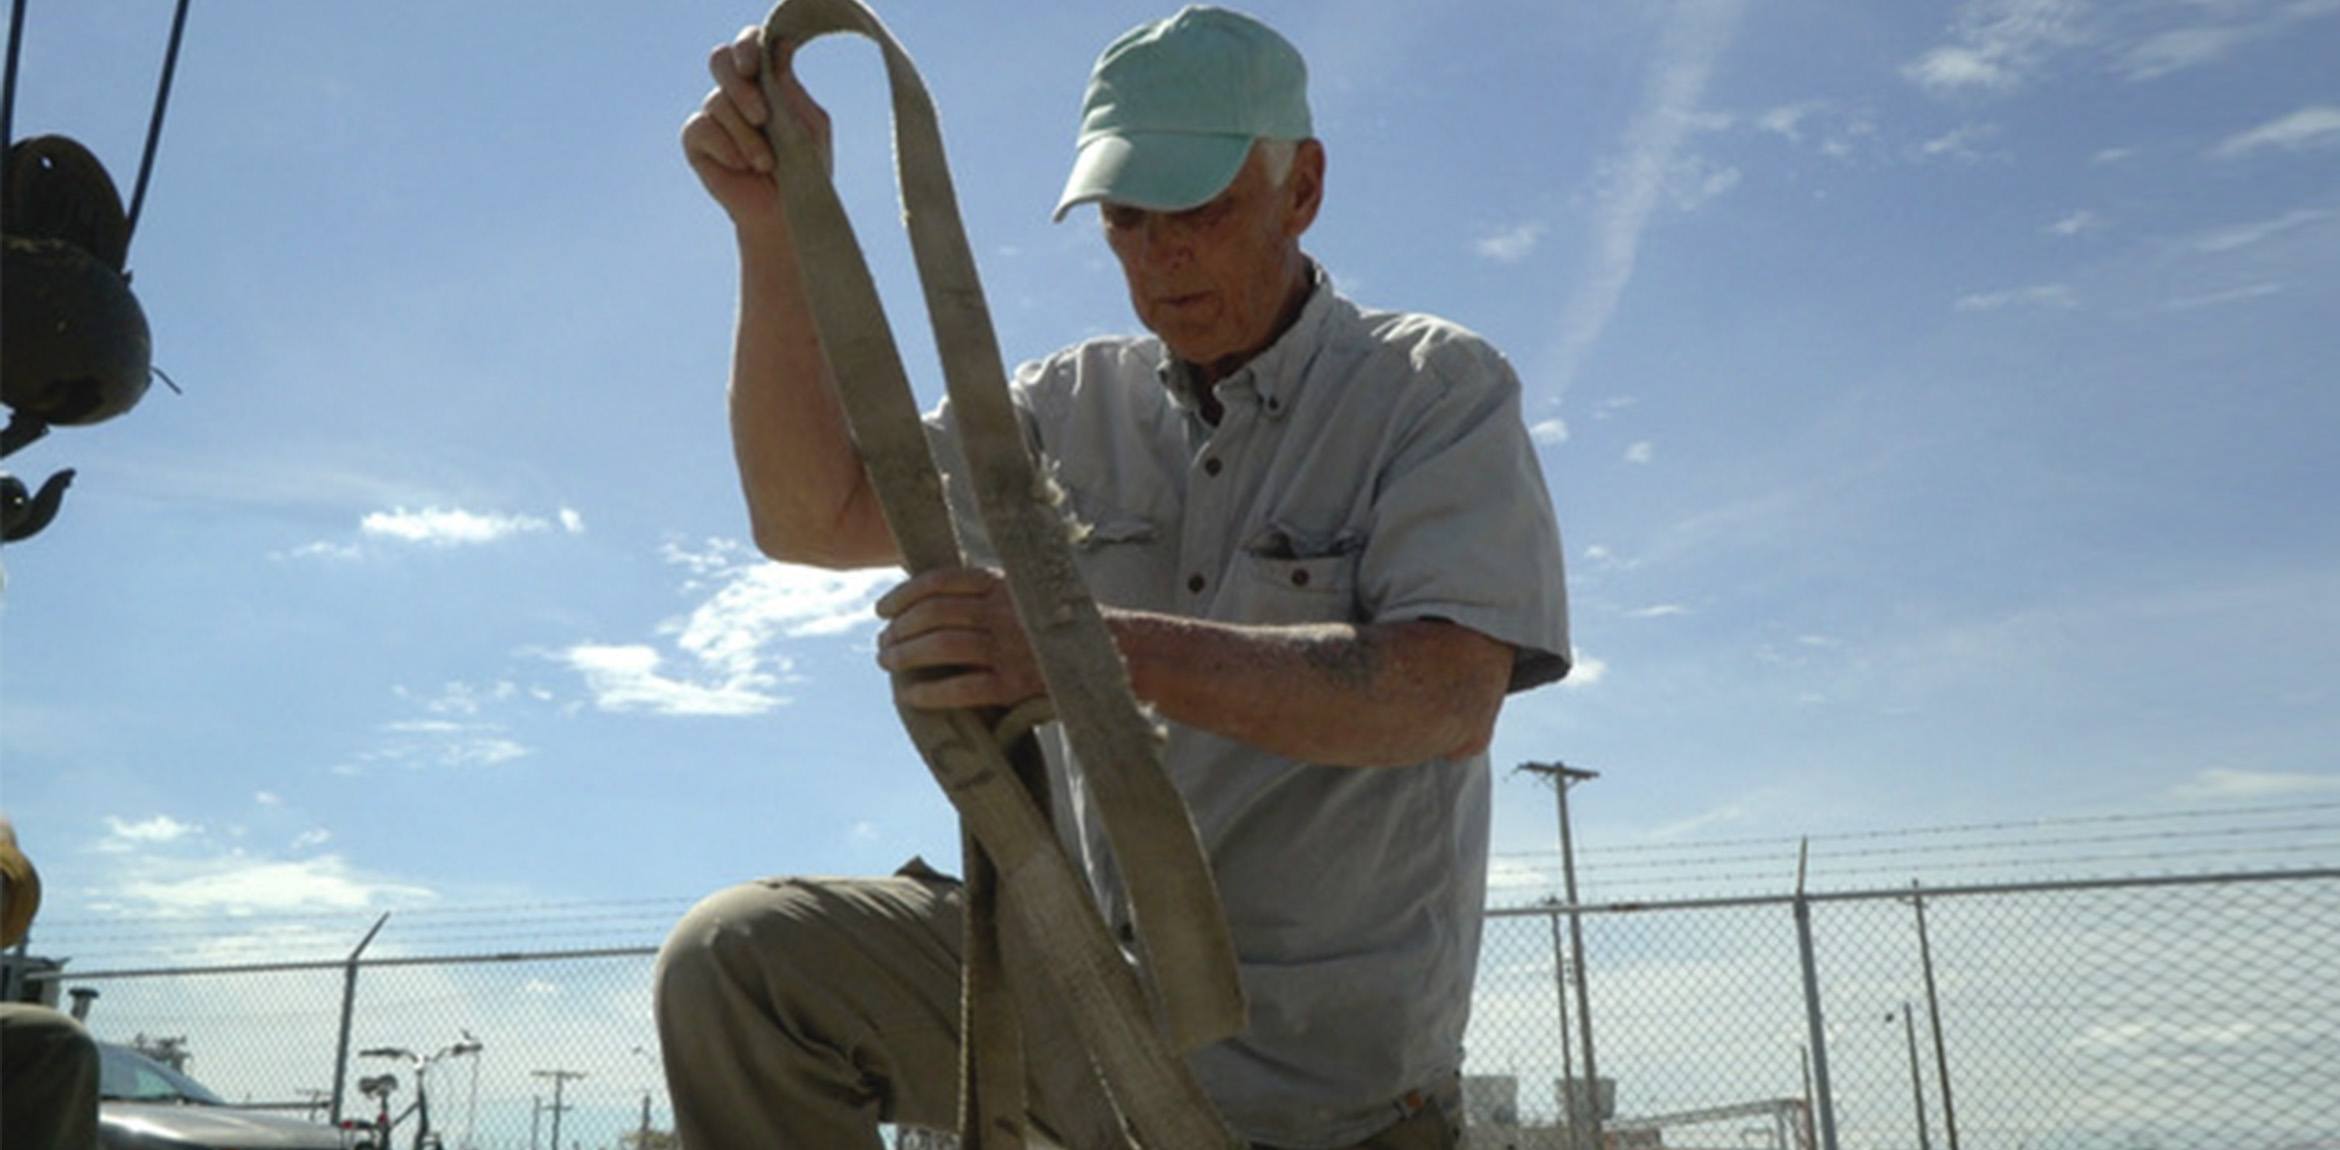 A man tying a thick packing rope with both hands